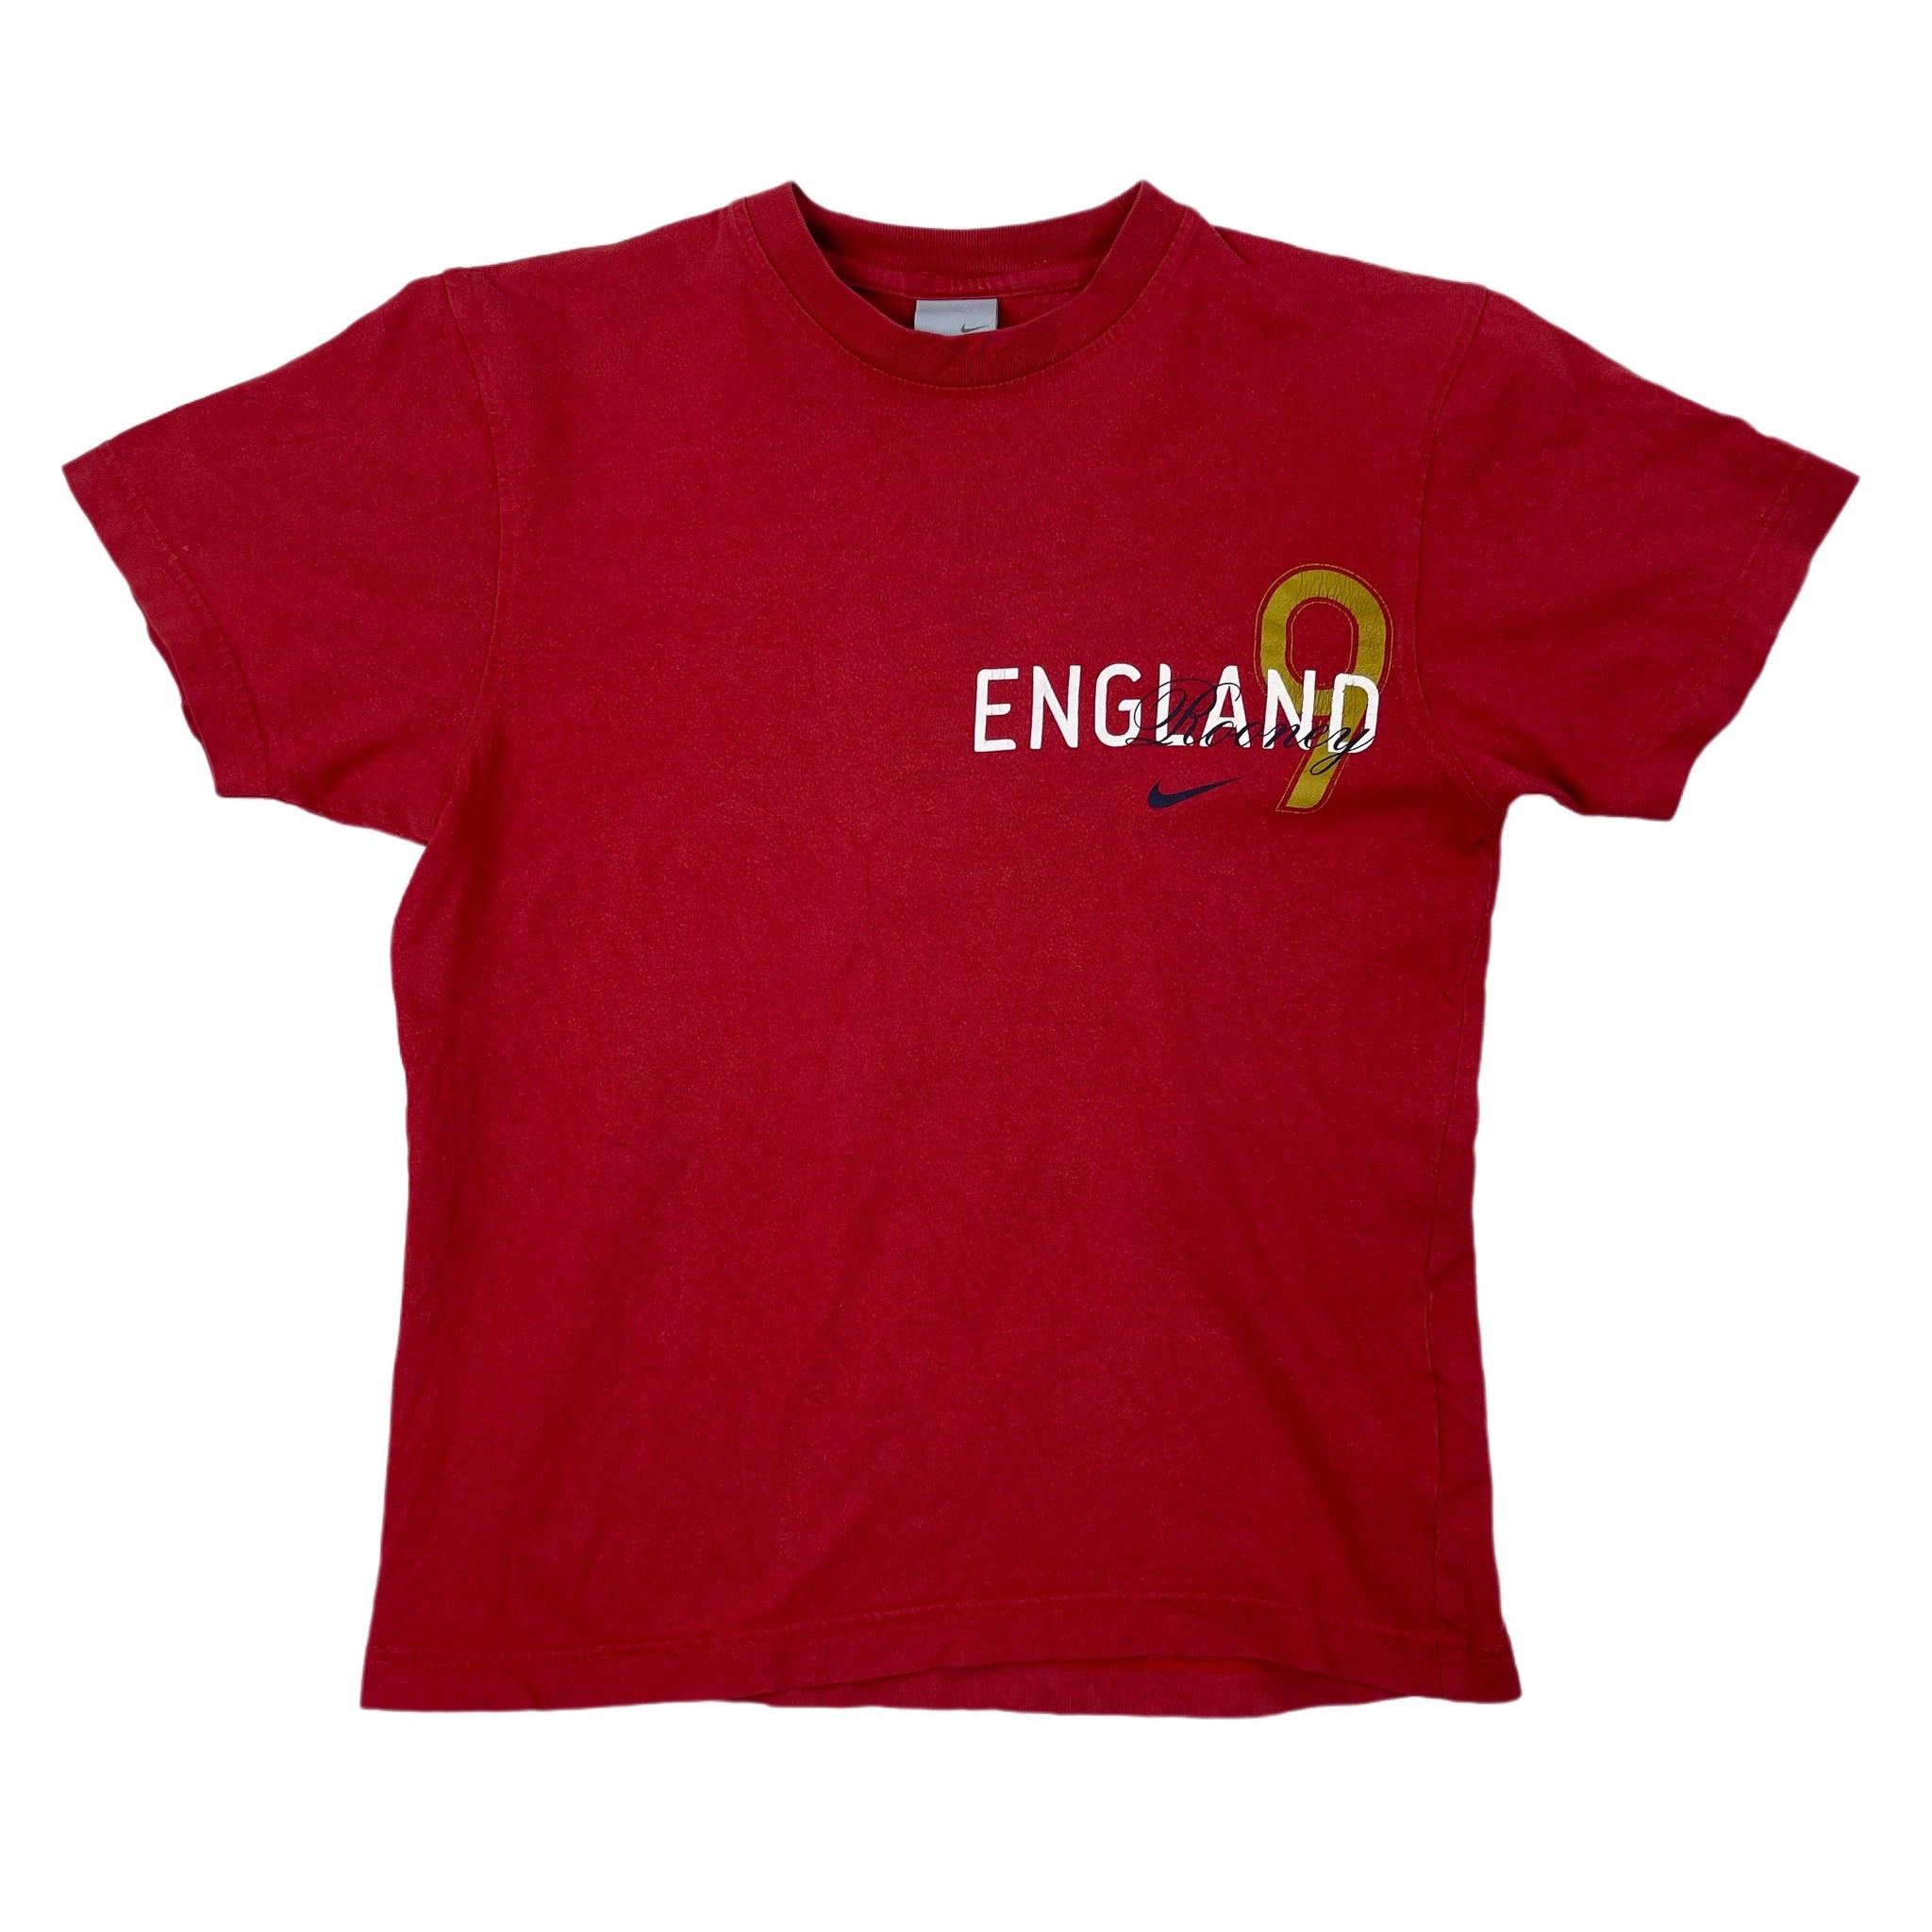 Vintage Red Nike Rooney England T-Shirt - XS/S